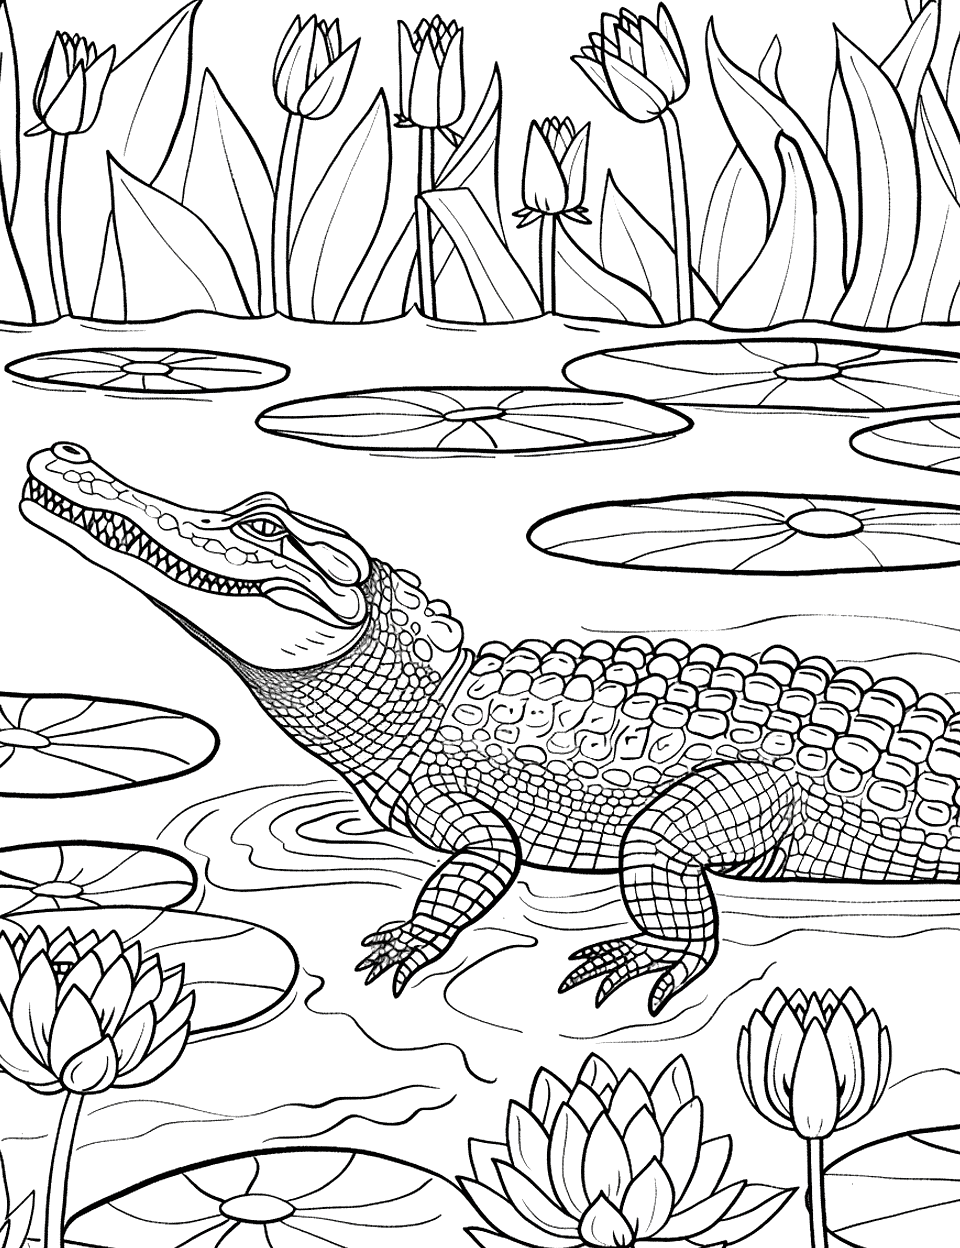 Crocodile and Lotus Pond Coloring Page - A crocodile calmly swimming in a pond filled with lotus flowers.